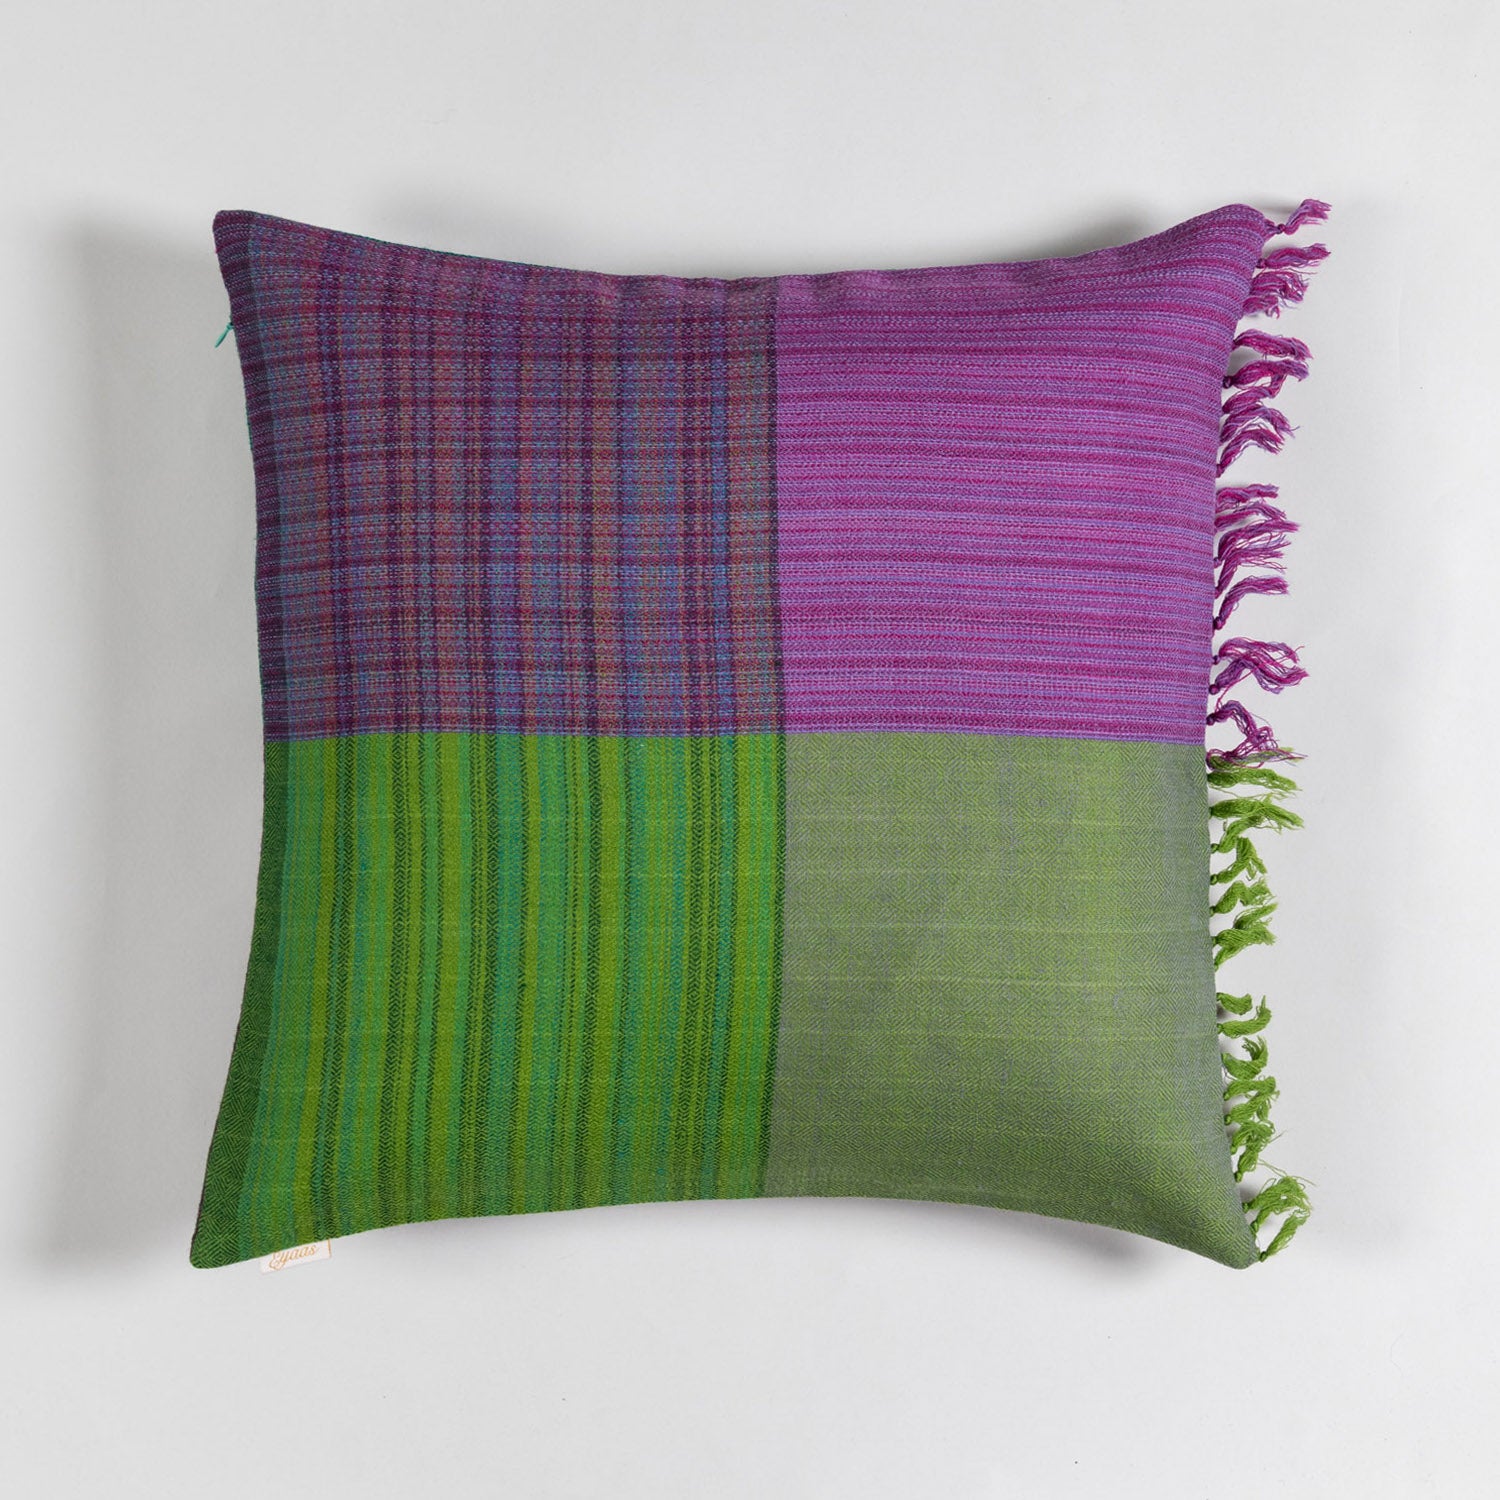 Handwoven Upcycled Green & Purple Wool Cushion Cover - 18x18